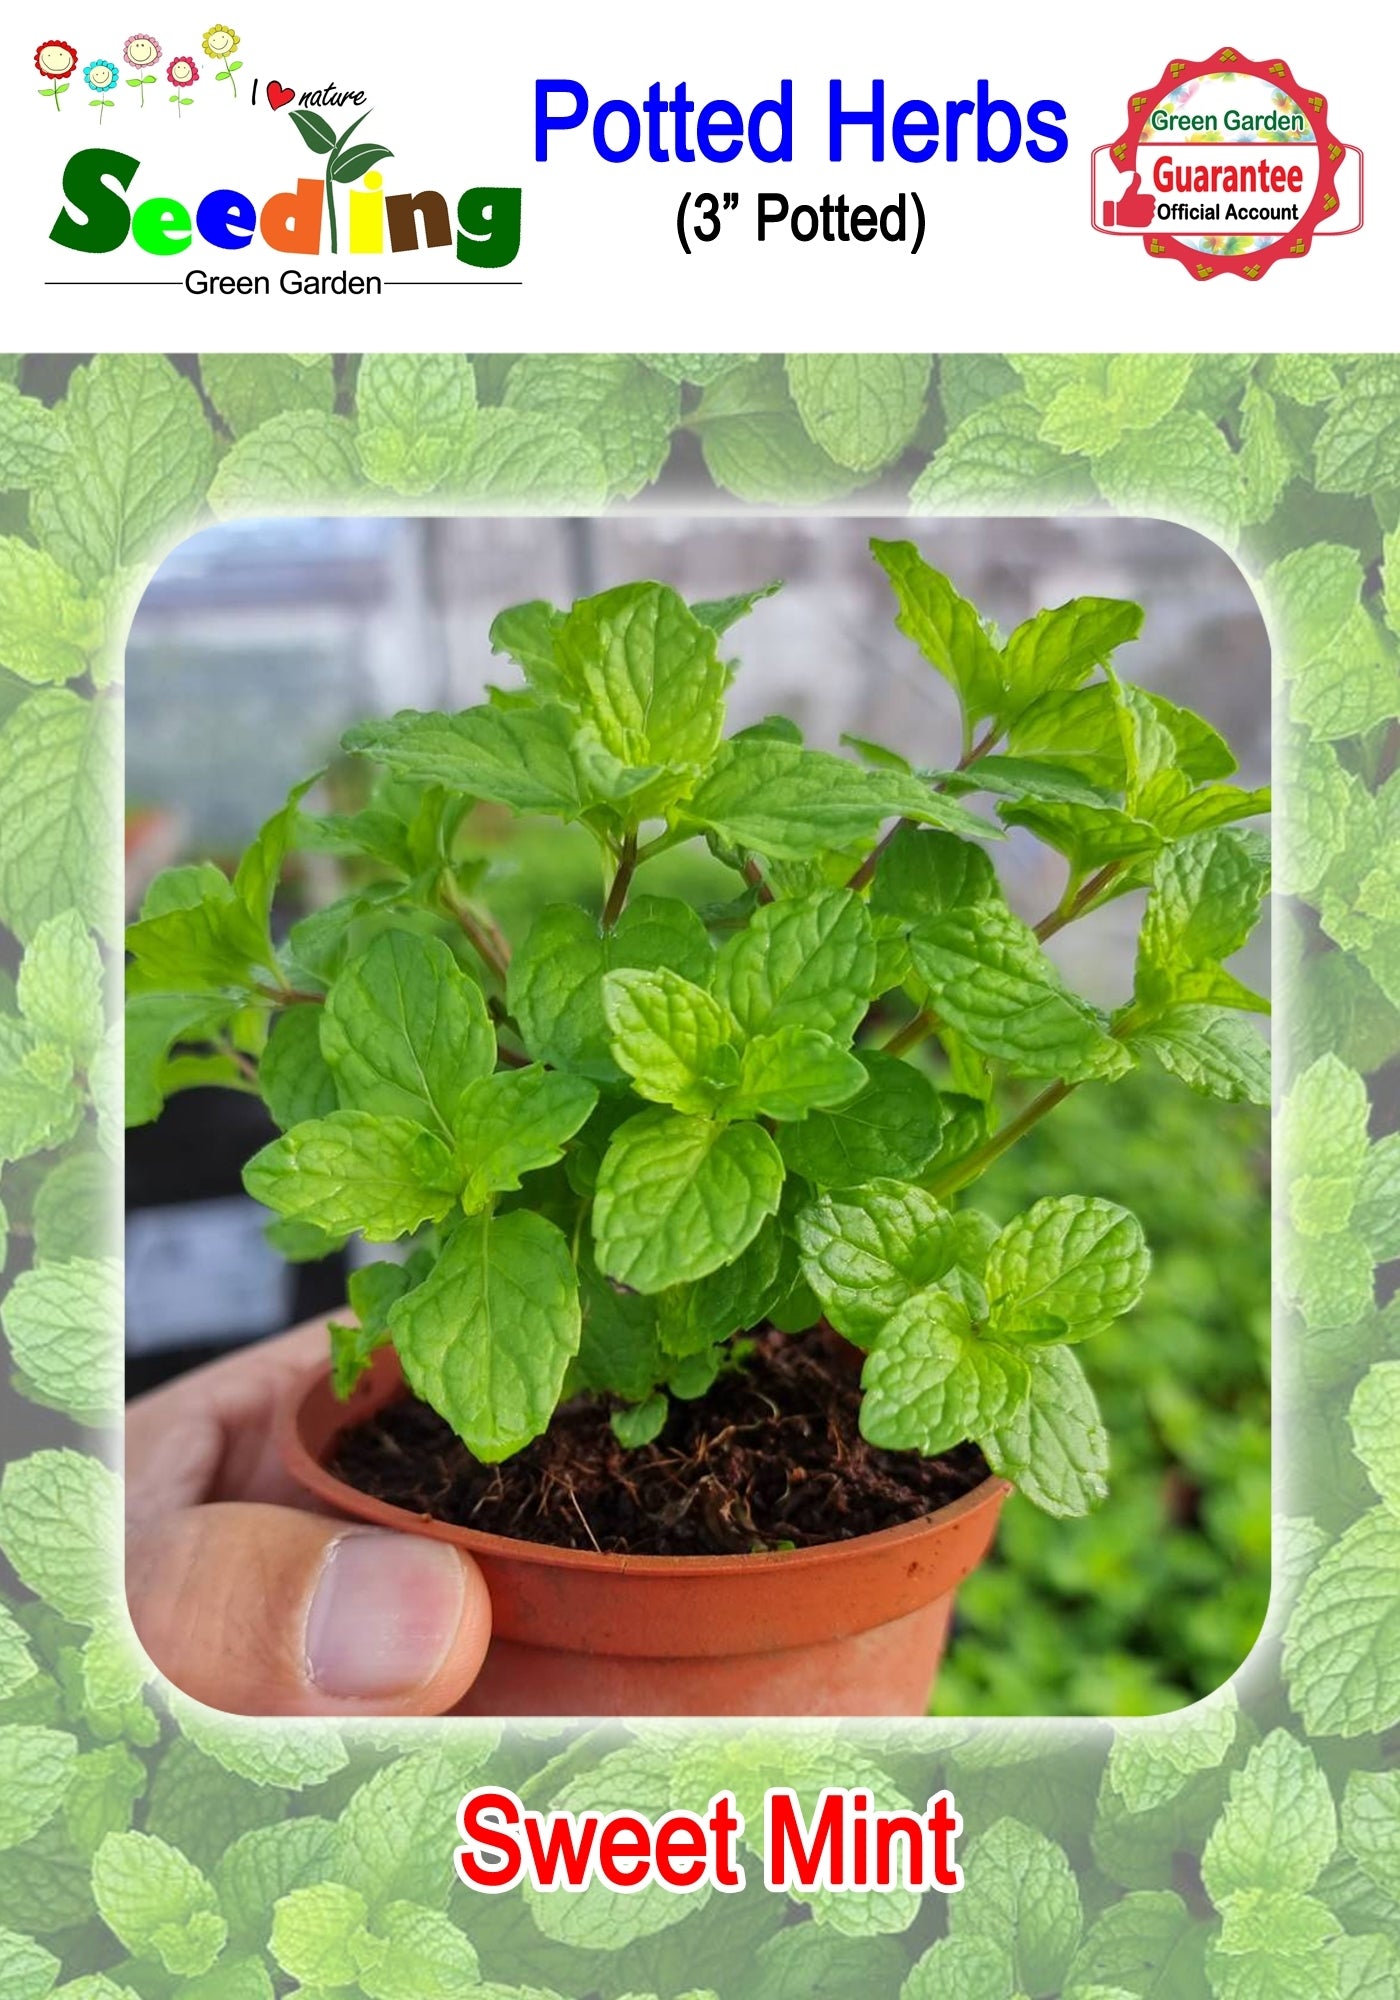 Buy 1 take 1 Assorted Potted Herbs in 3" Pot